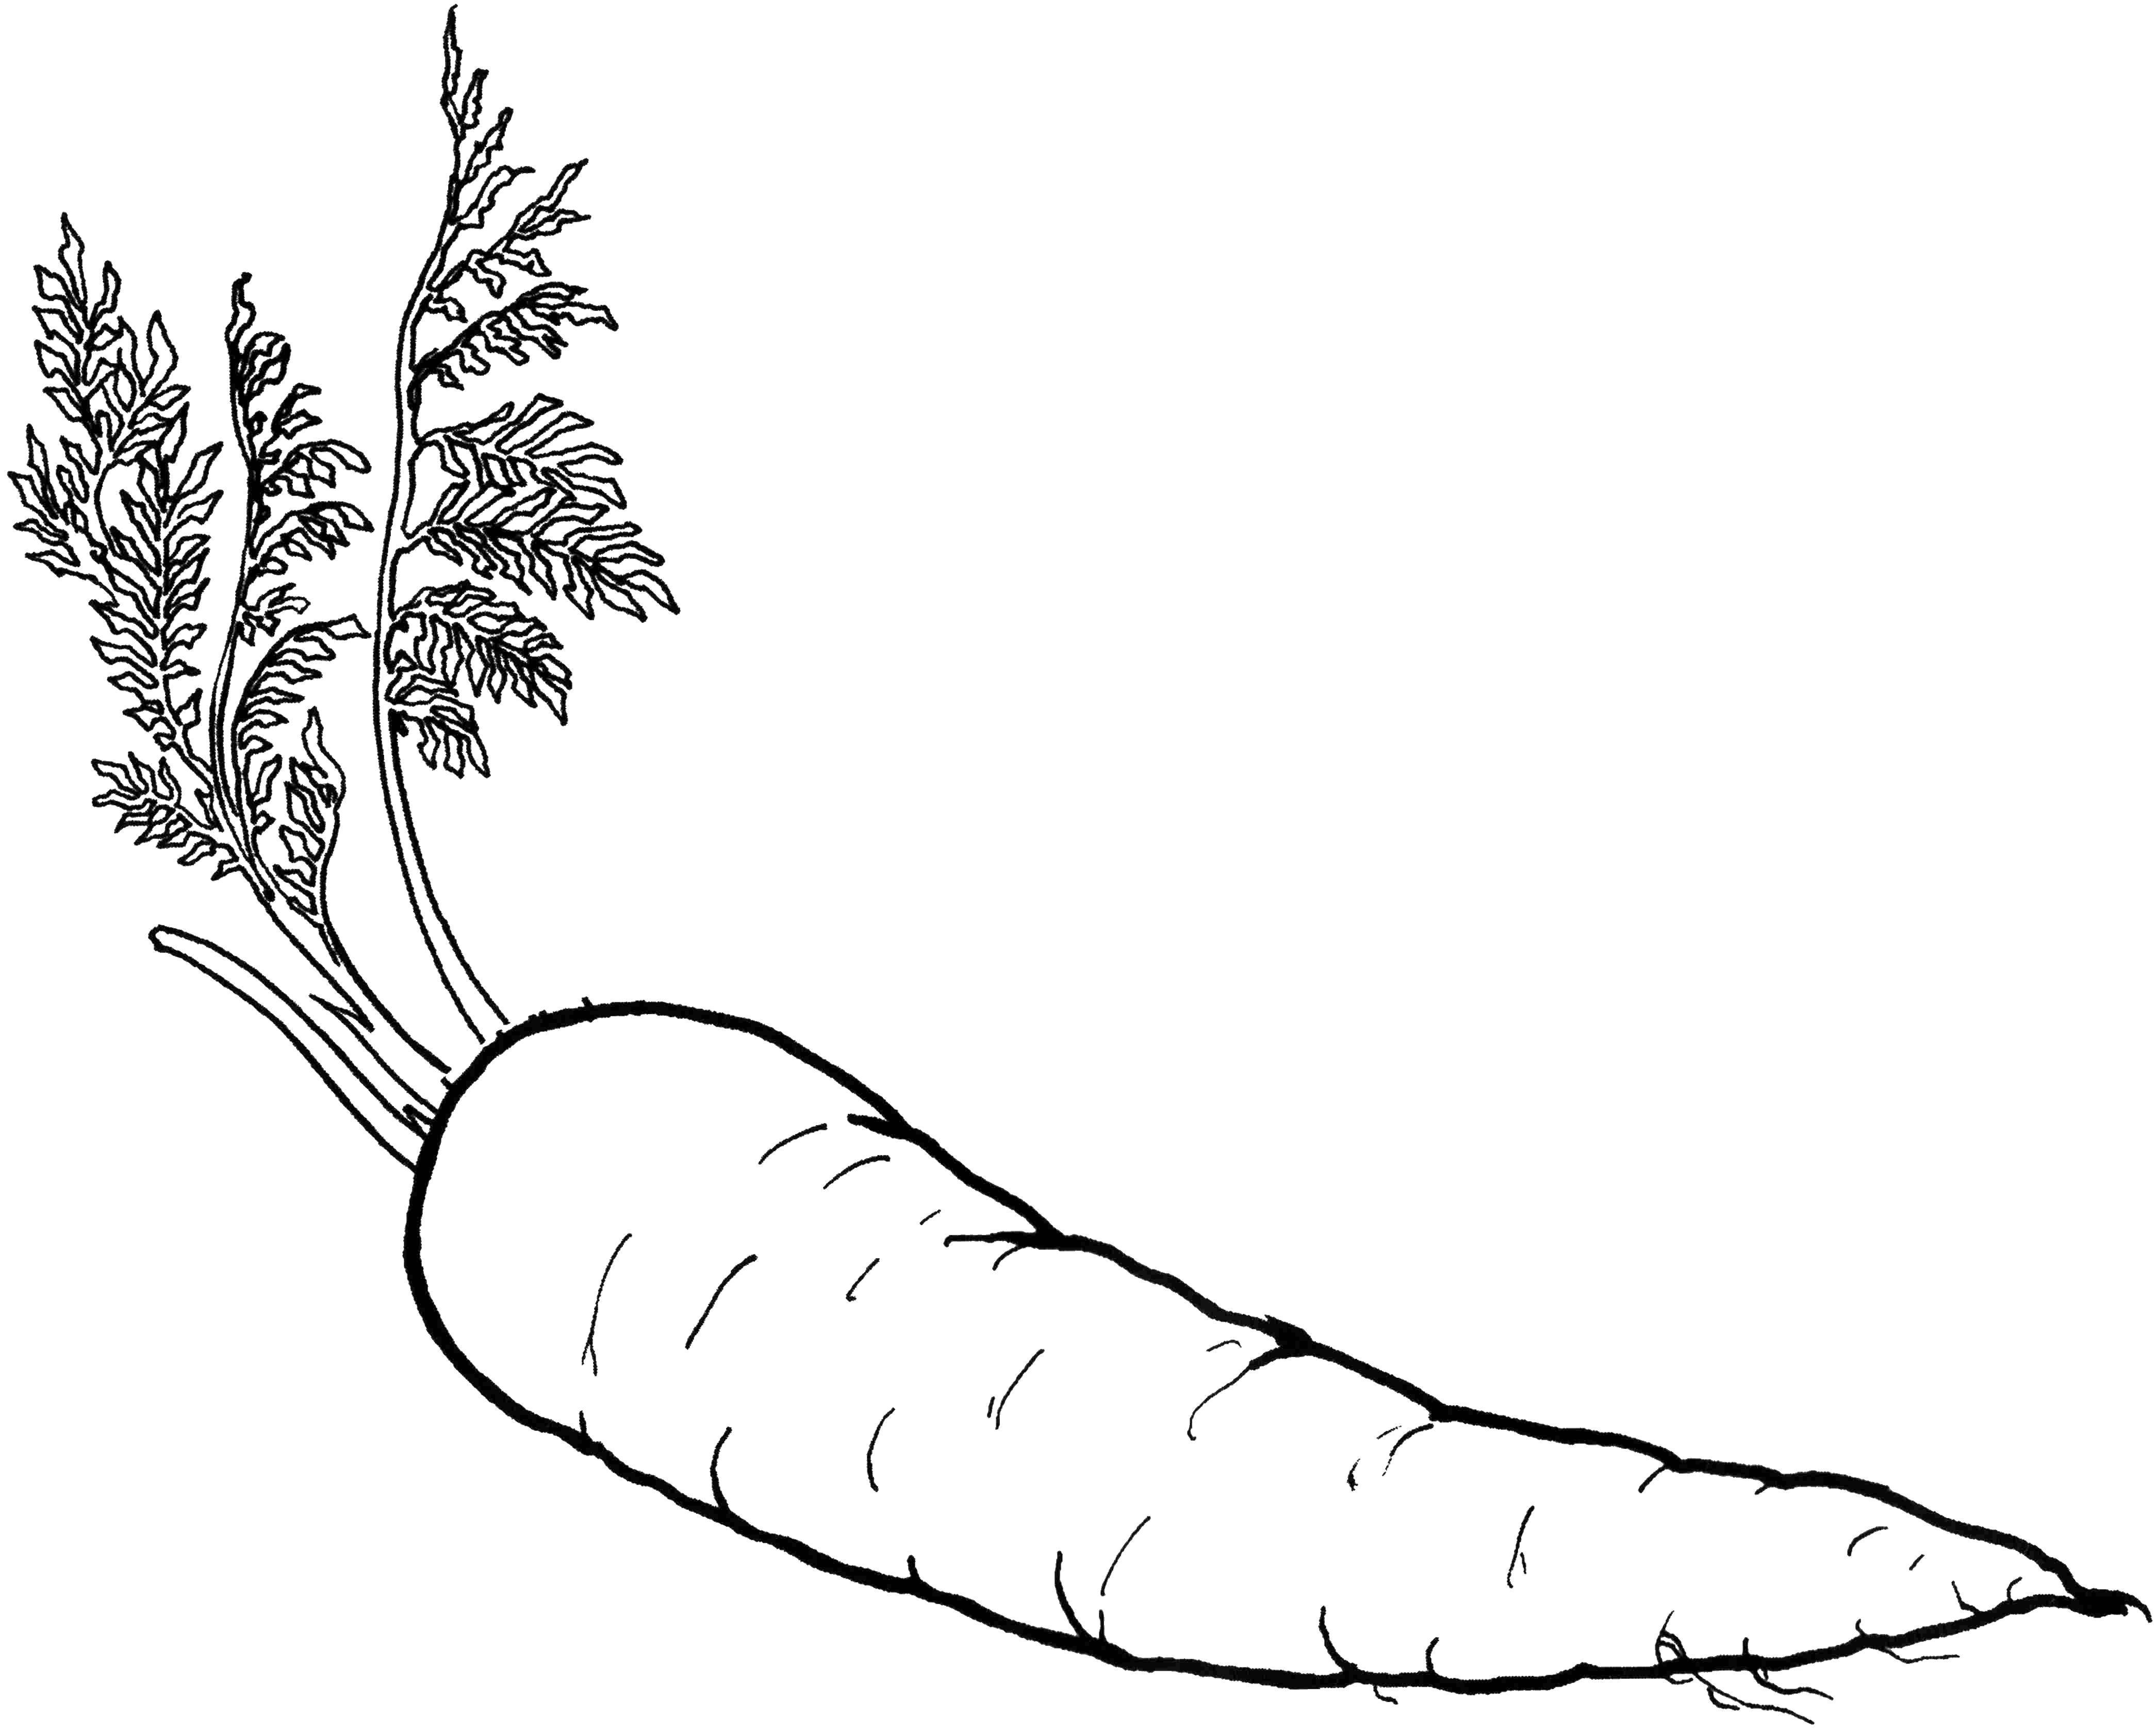 Coloring Carrot. Category Vegetables. Tags:  vegetables, food, carrots.